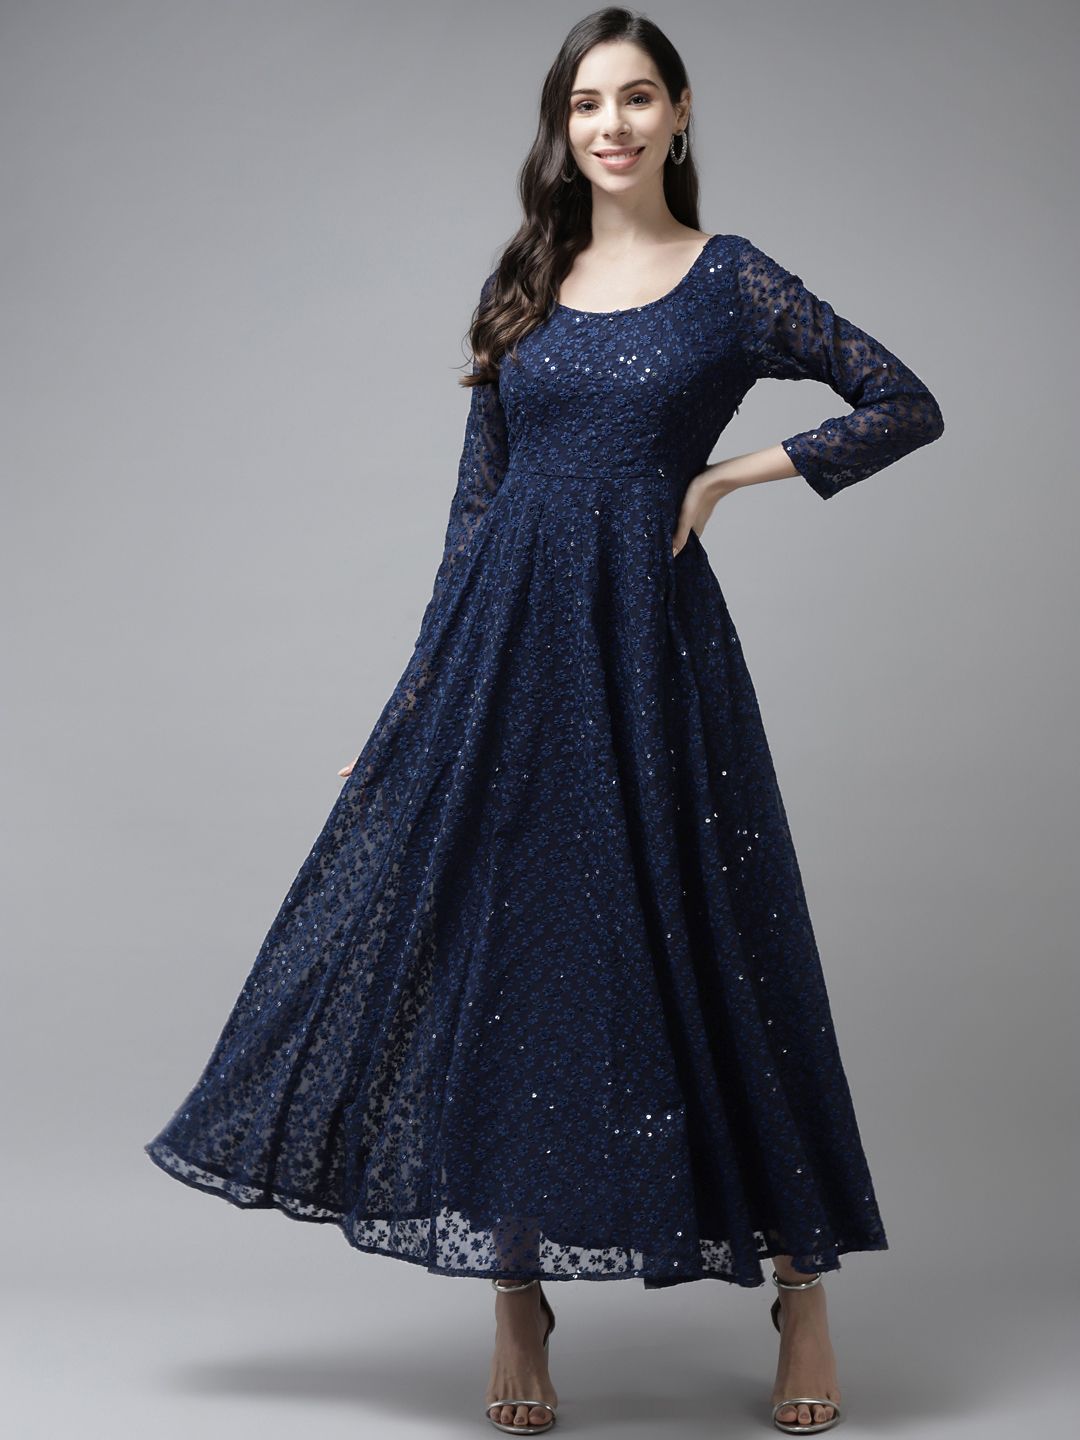 PANIT Women Navy Blue Ethnic Motifs Embroidered Ethnic Maxi Dress Price in India